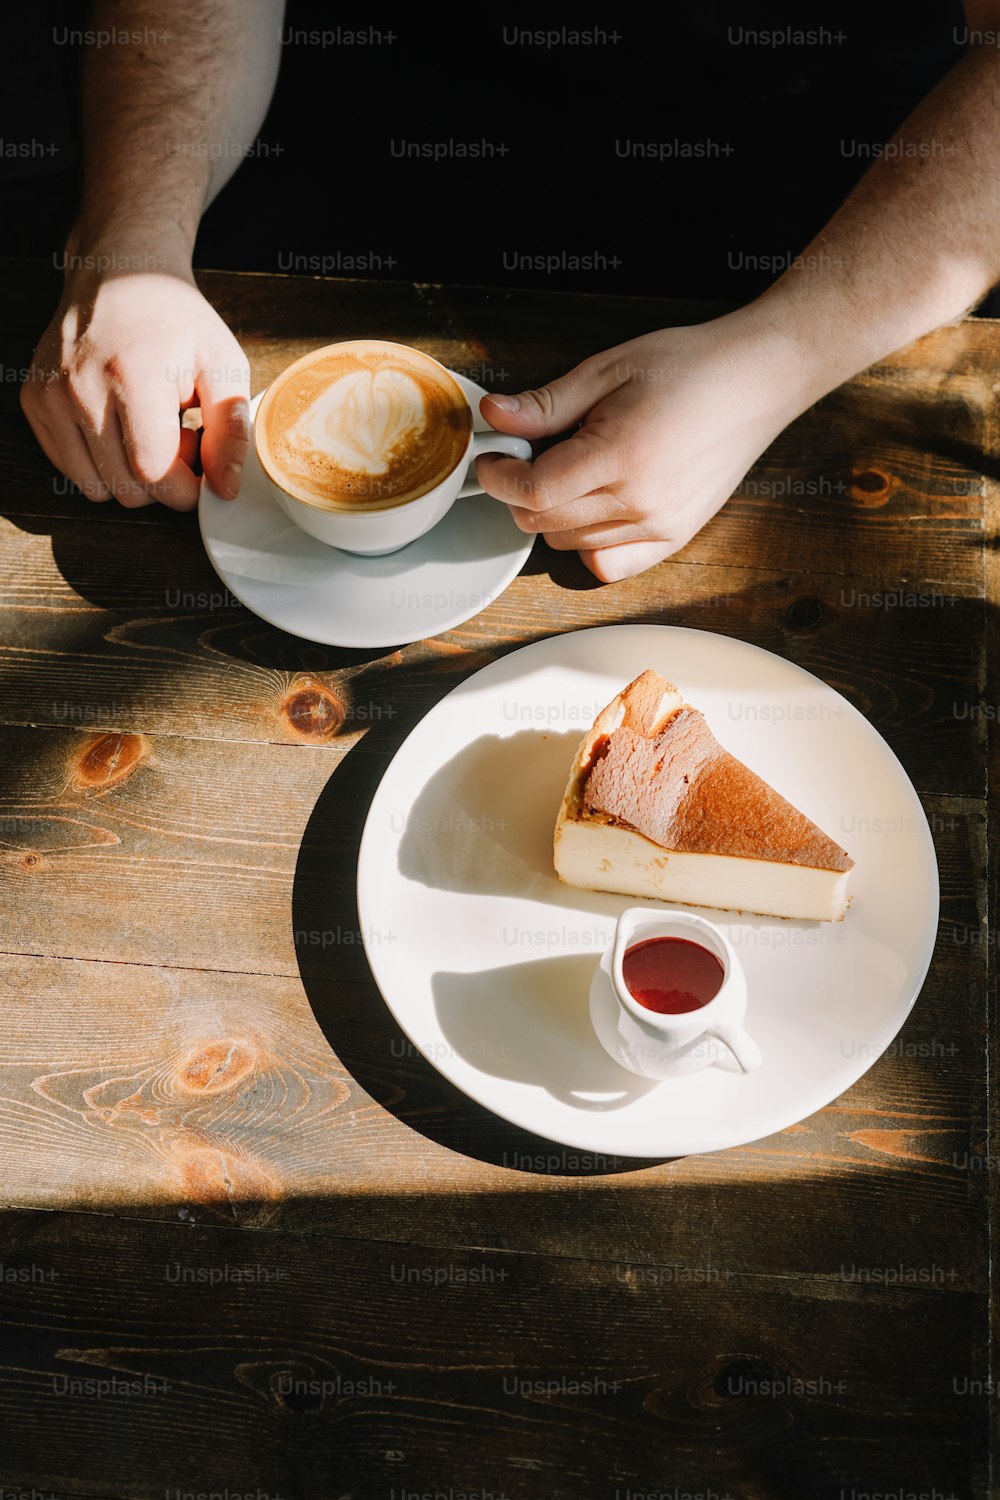 a person holding a cup of coffee and a slice of cake on a plate